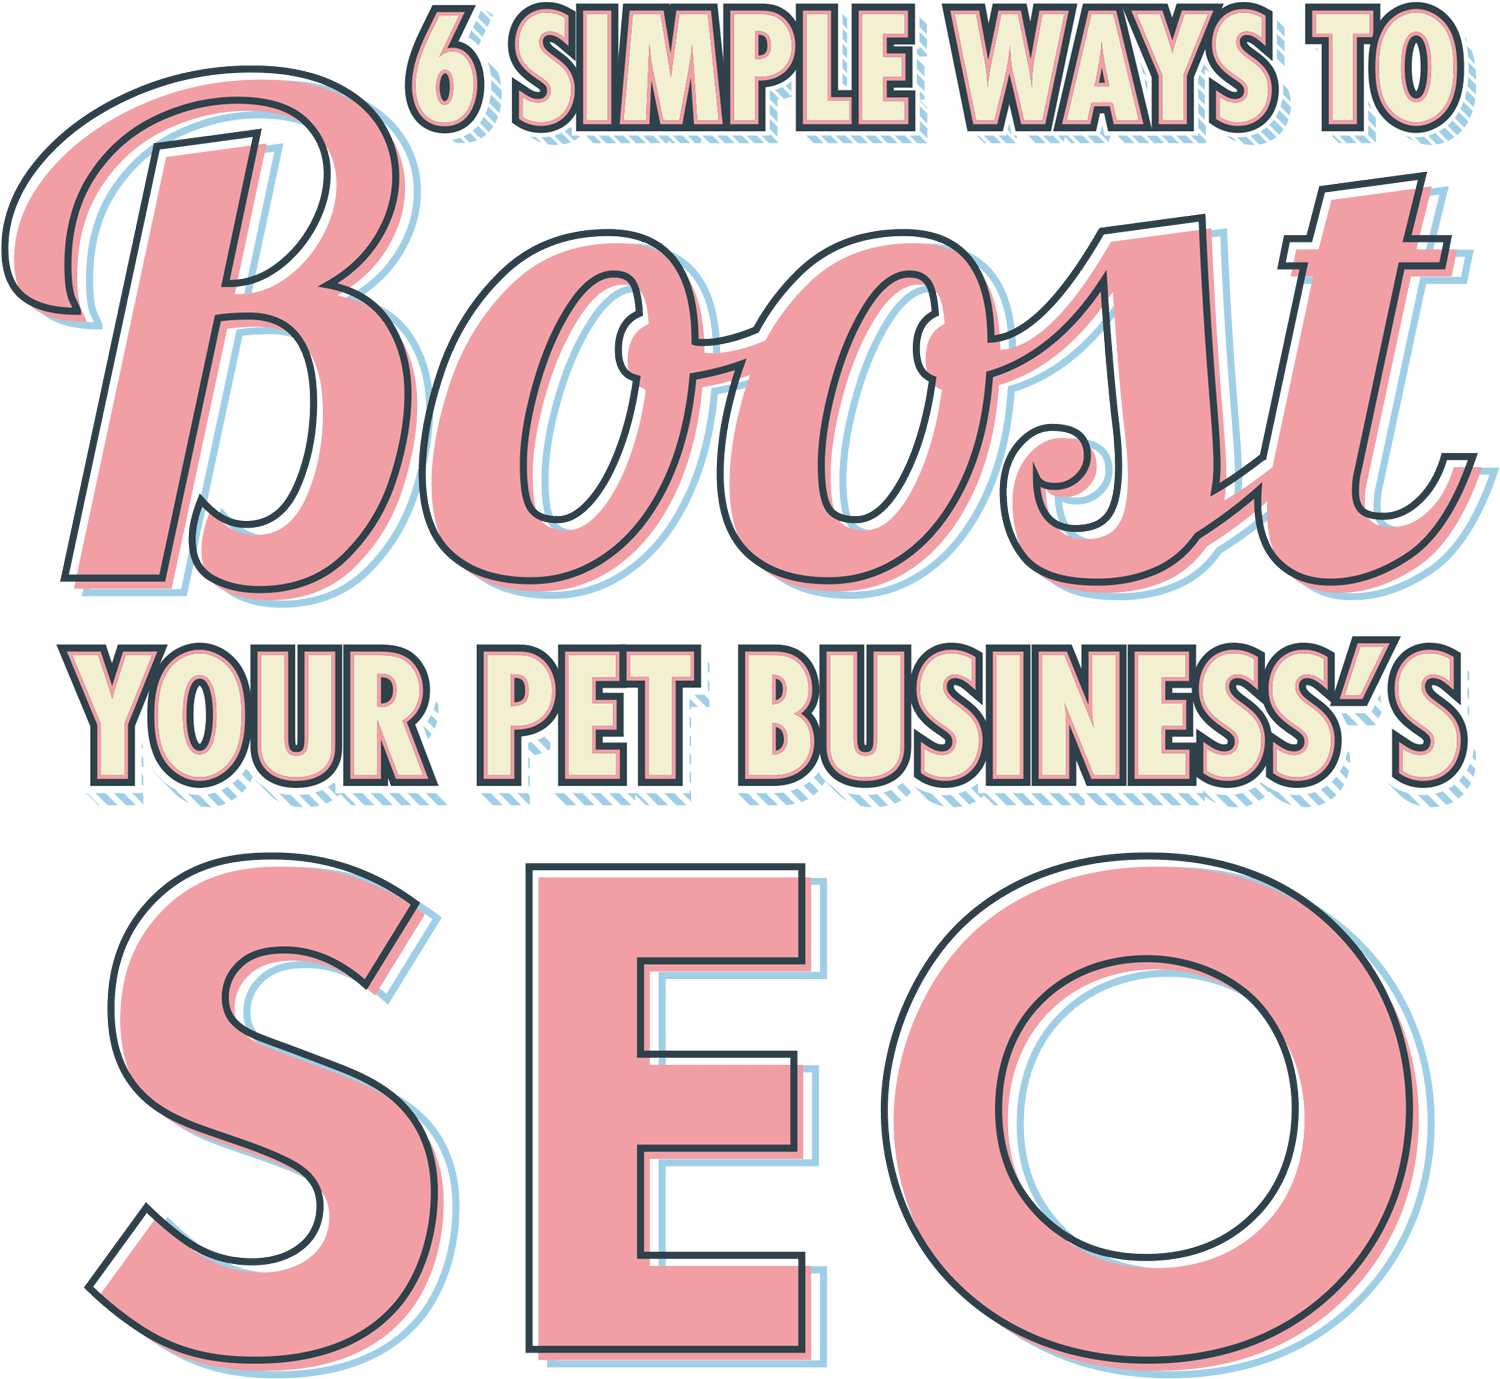 6 Simple Ways to Boost Your Pet Business's SEO